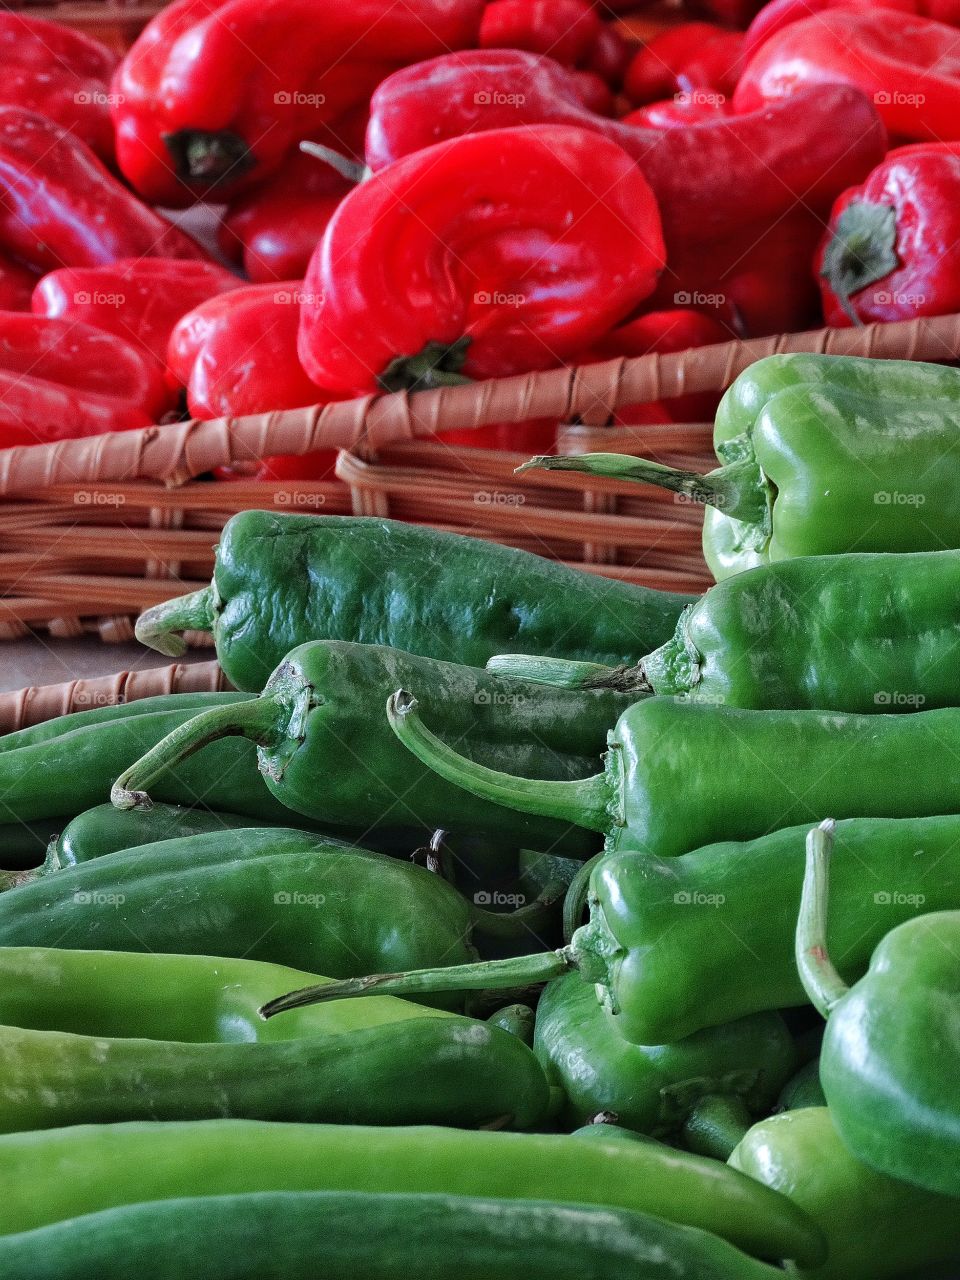 Fresh Red And Green Peppers. Fresh Organic Bell peppers On Display At A Farmer's Market
